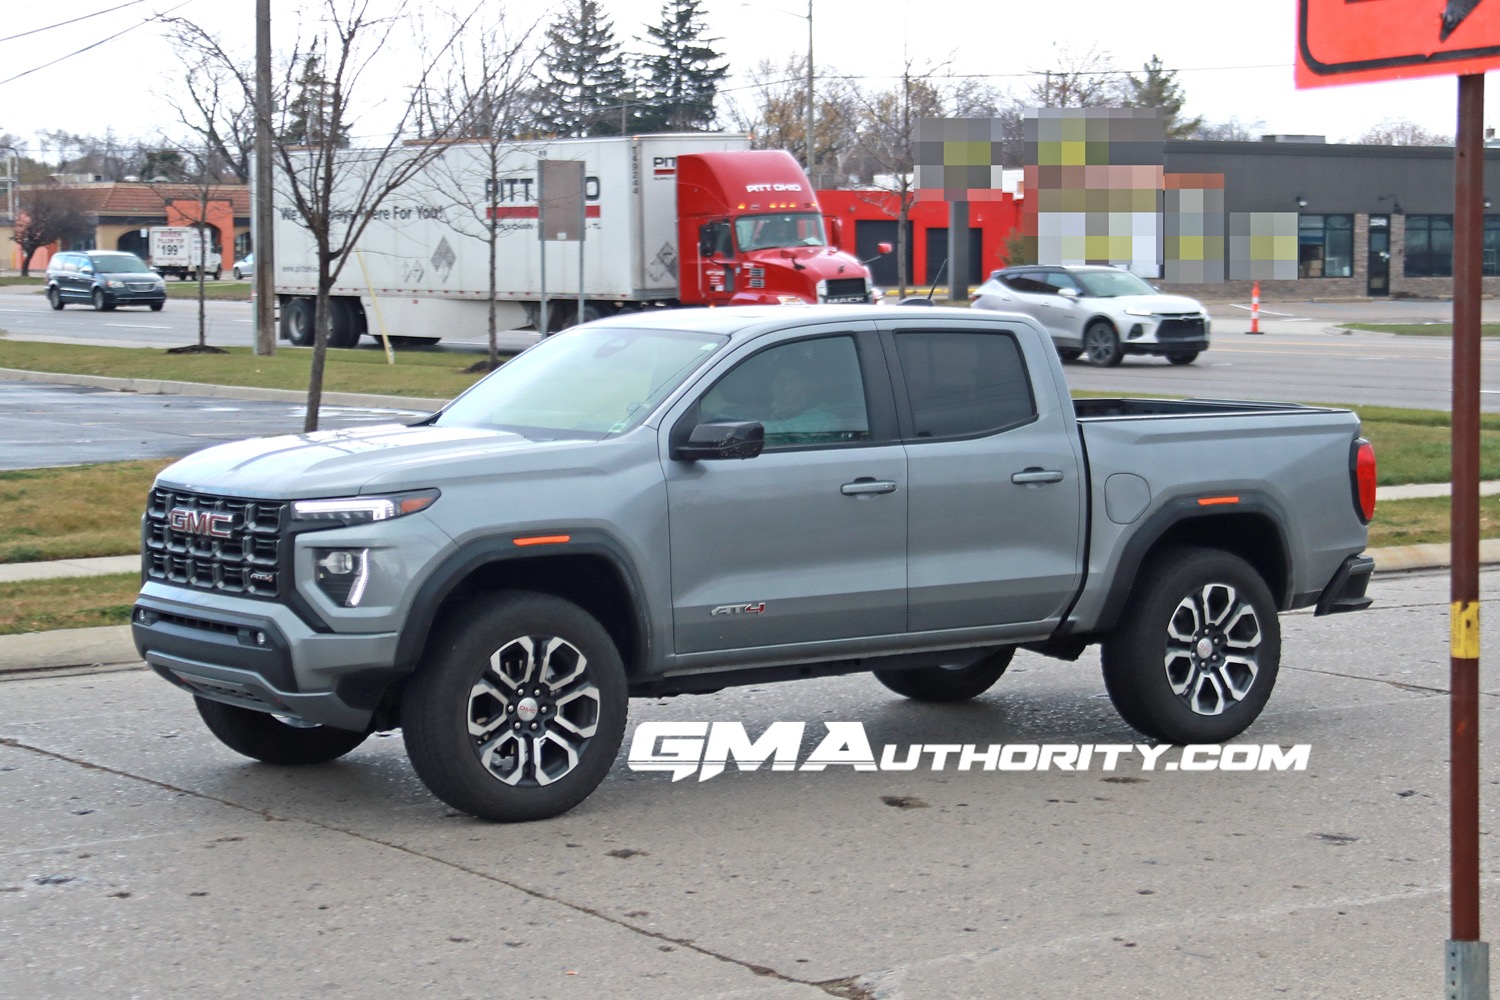 2023-gmc-canyon-at4-sterling-metallic-gxd-20-inch-wheels-rd5-real-world-photos-exterior3-chevrolet-colorado-trail-boss-sterling-gray-metallic-gxd-first-real-world-photos-exterior-003